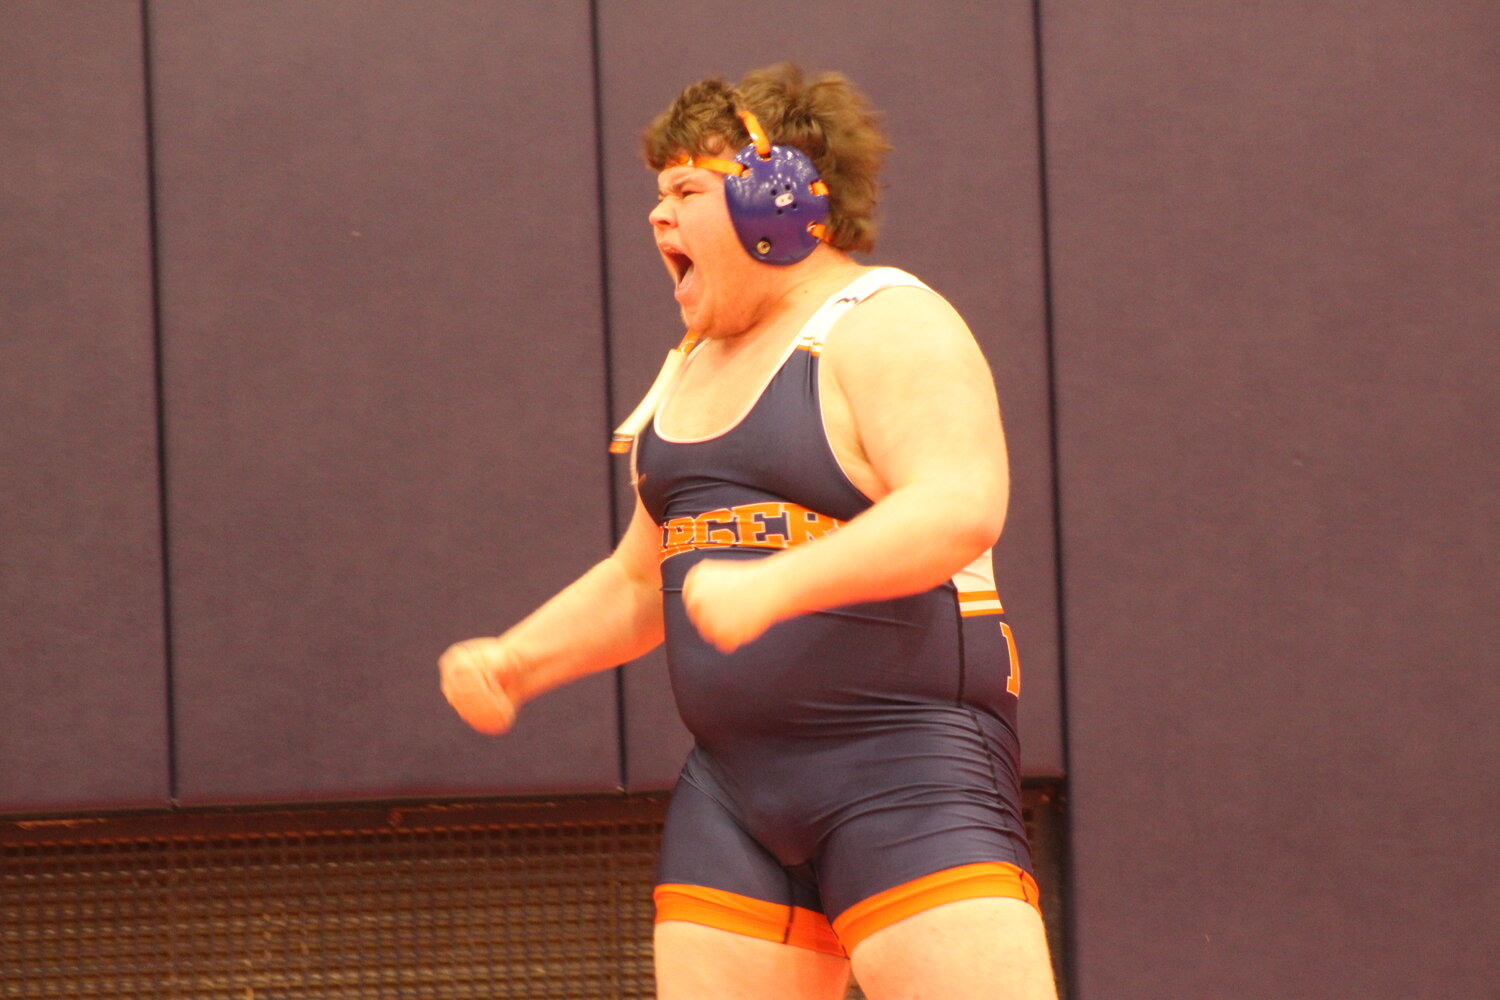 North Montgomery's Cale Anderson was the runner-up at 285 which included a pin over the top seed in the semi-finals. The Charger senior showed his emotion after the win.